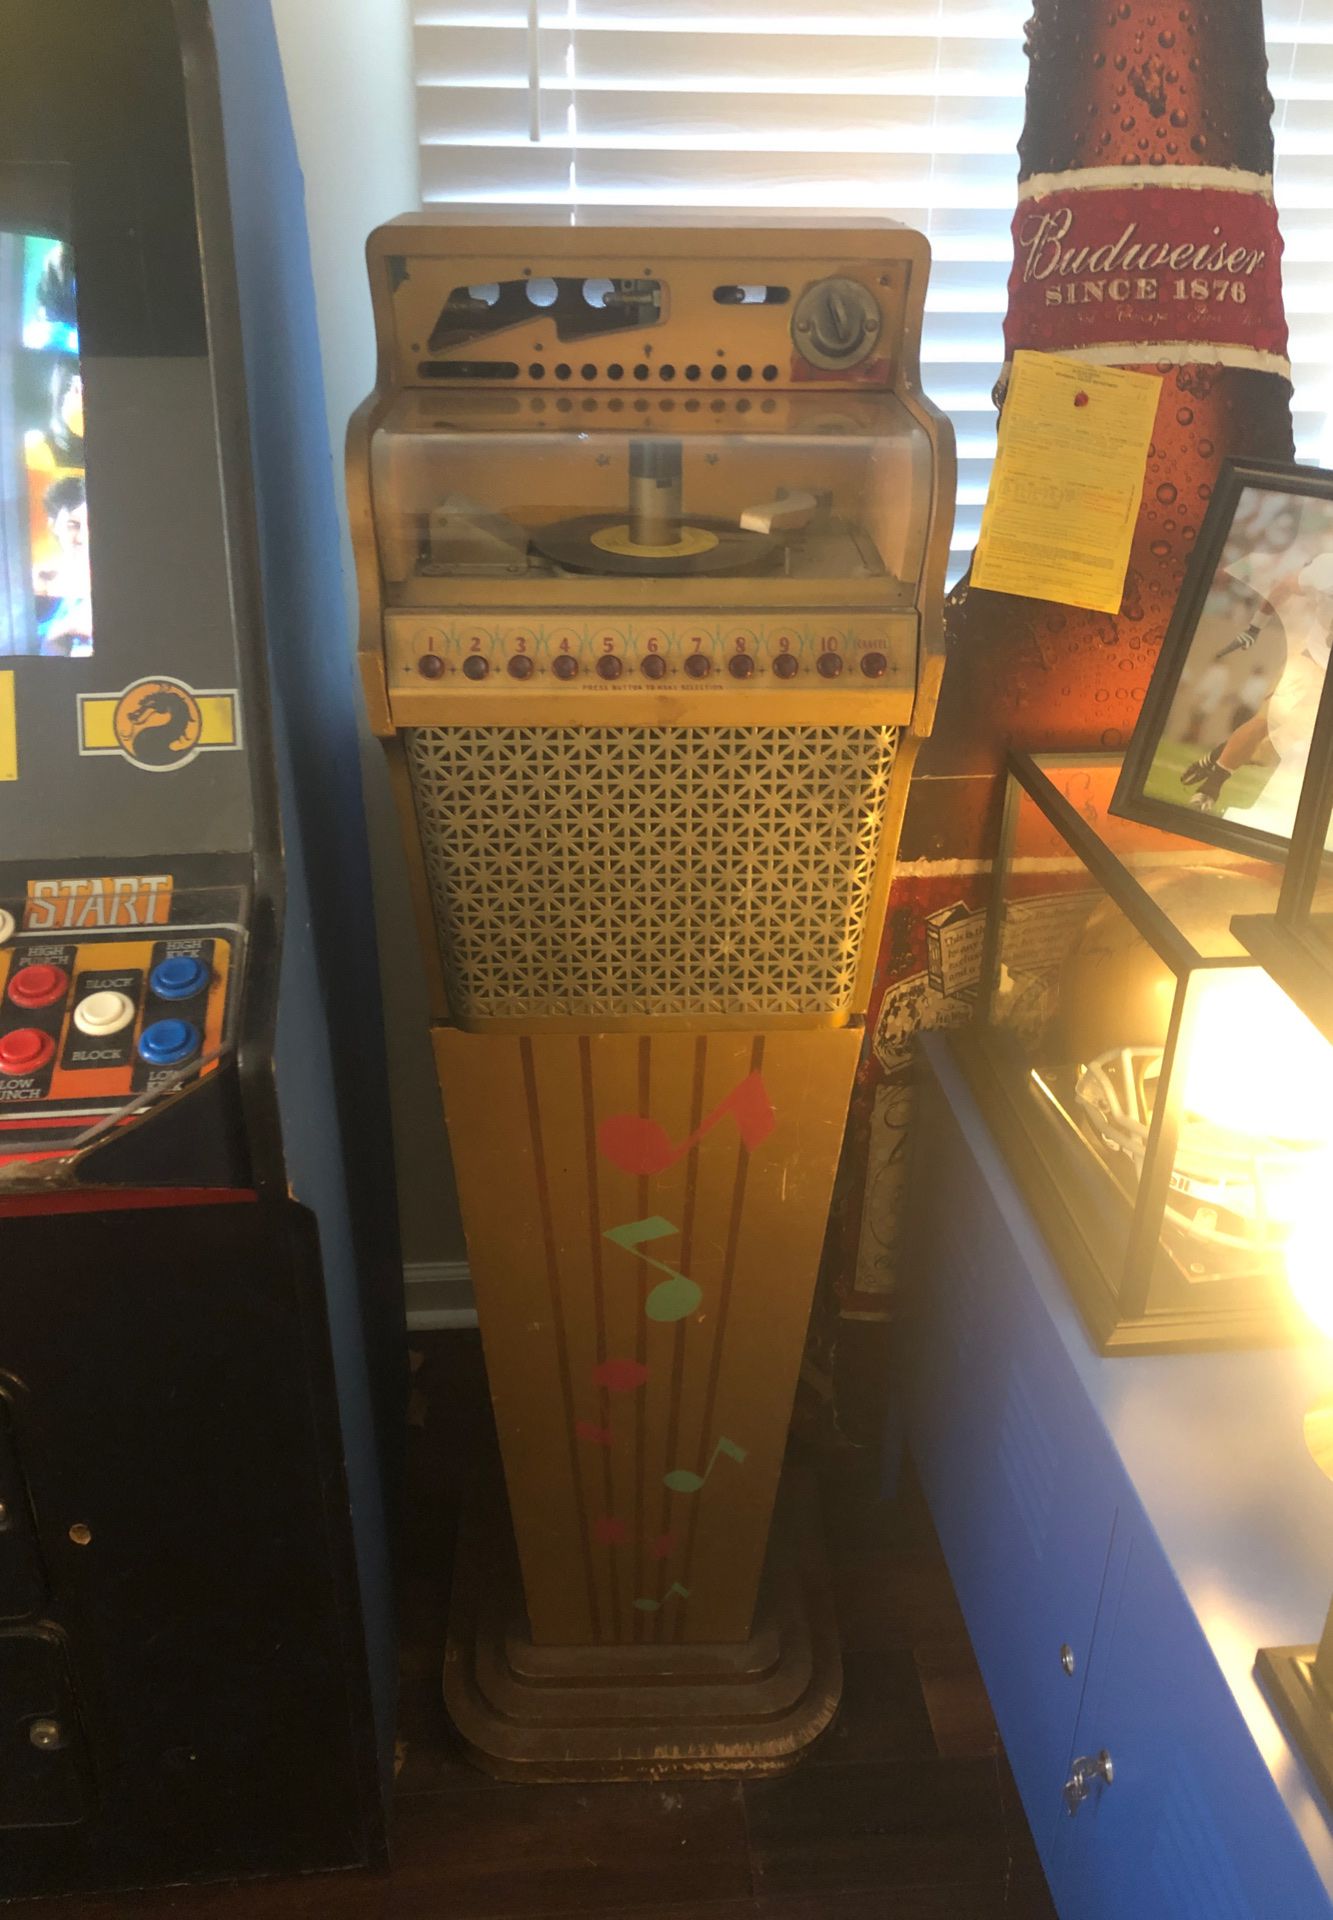 Old school juke box. Plays 45’s. Lights up needs some work. Over 50 years old